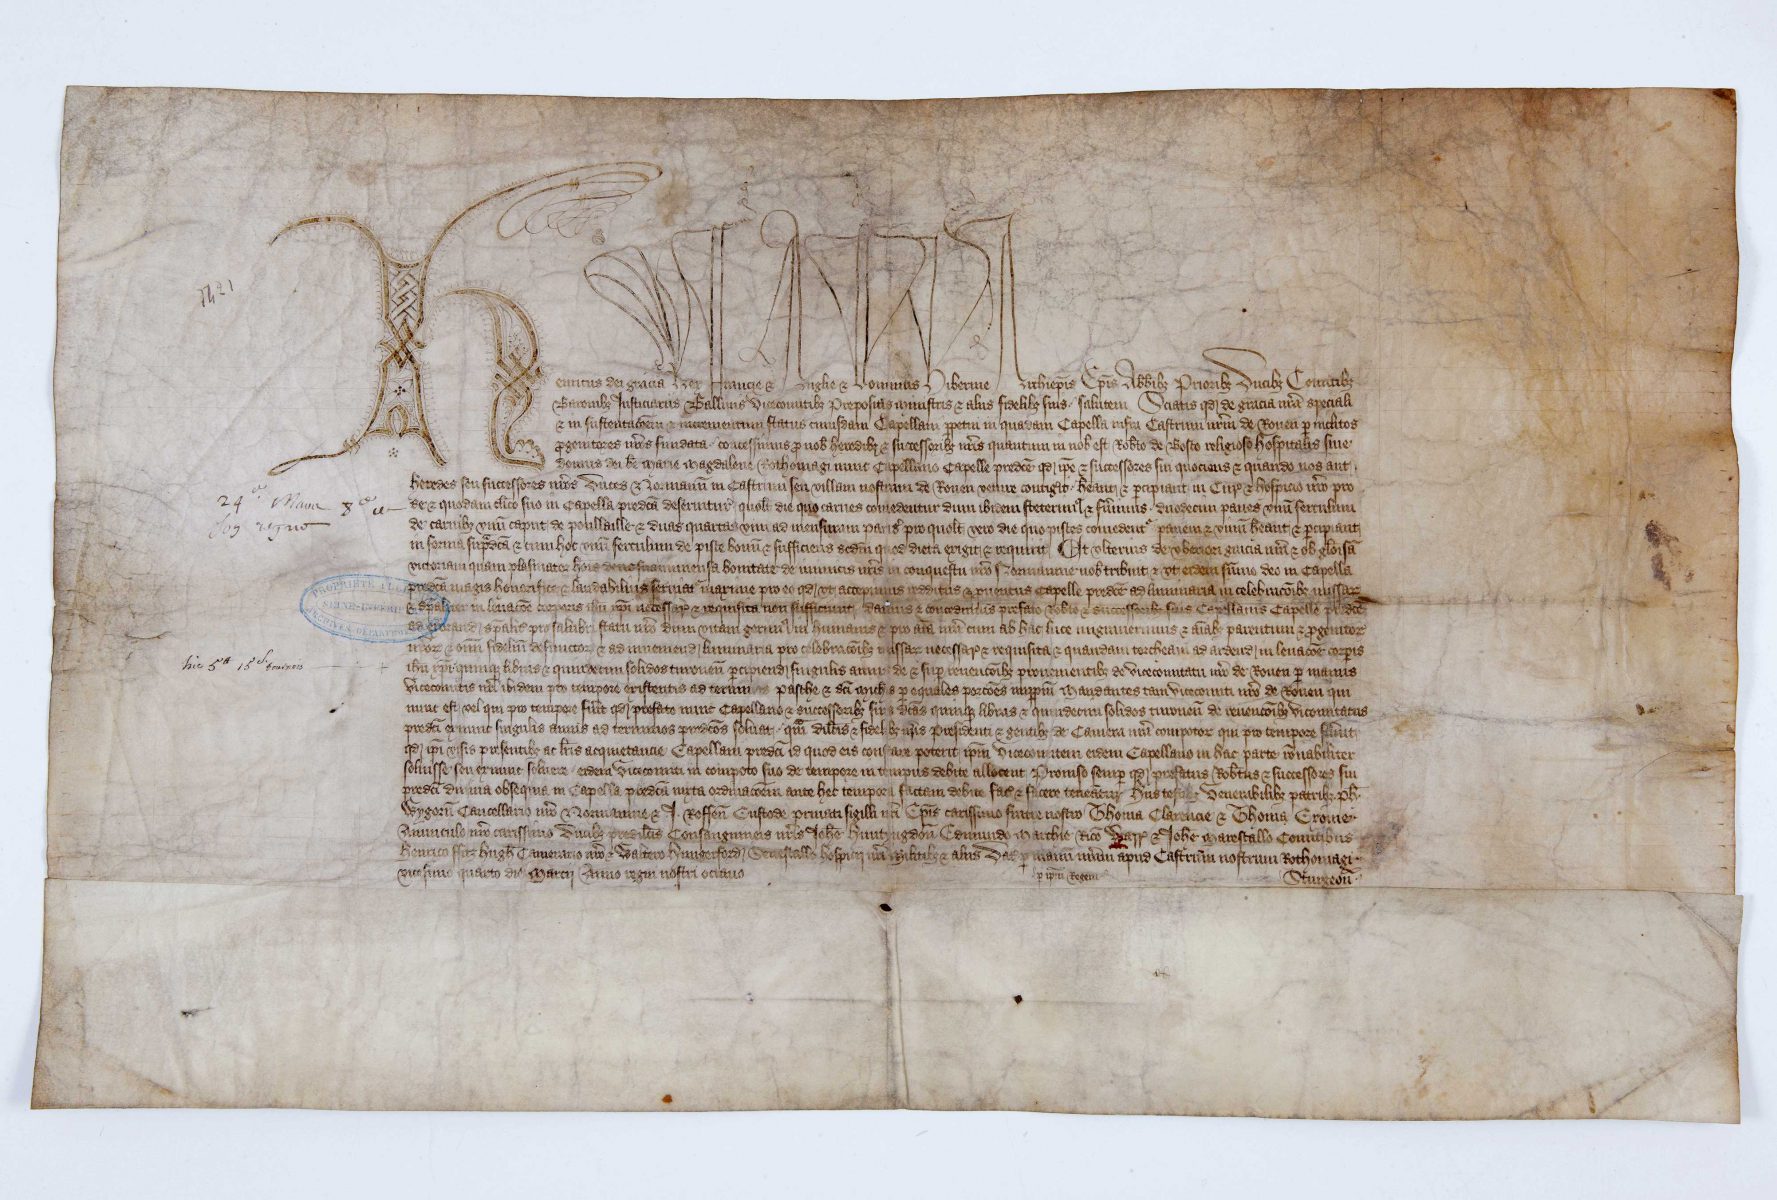 Charter of Henry V granting an income to the chaplain of Rouen castle in thanks for his “glorious victory”